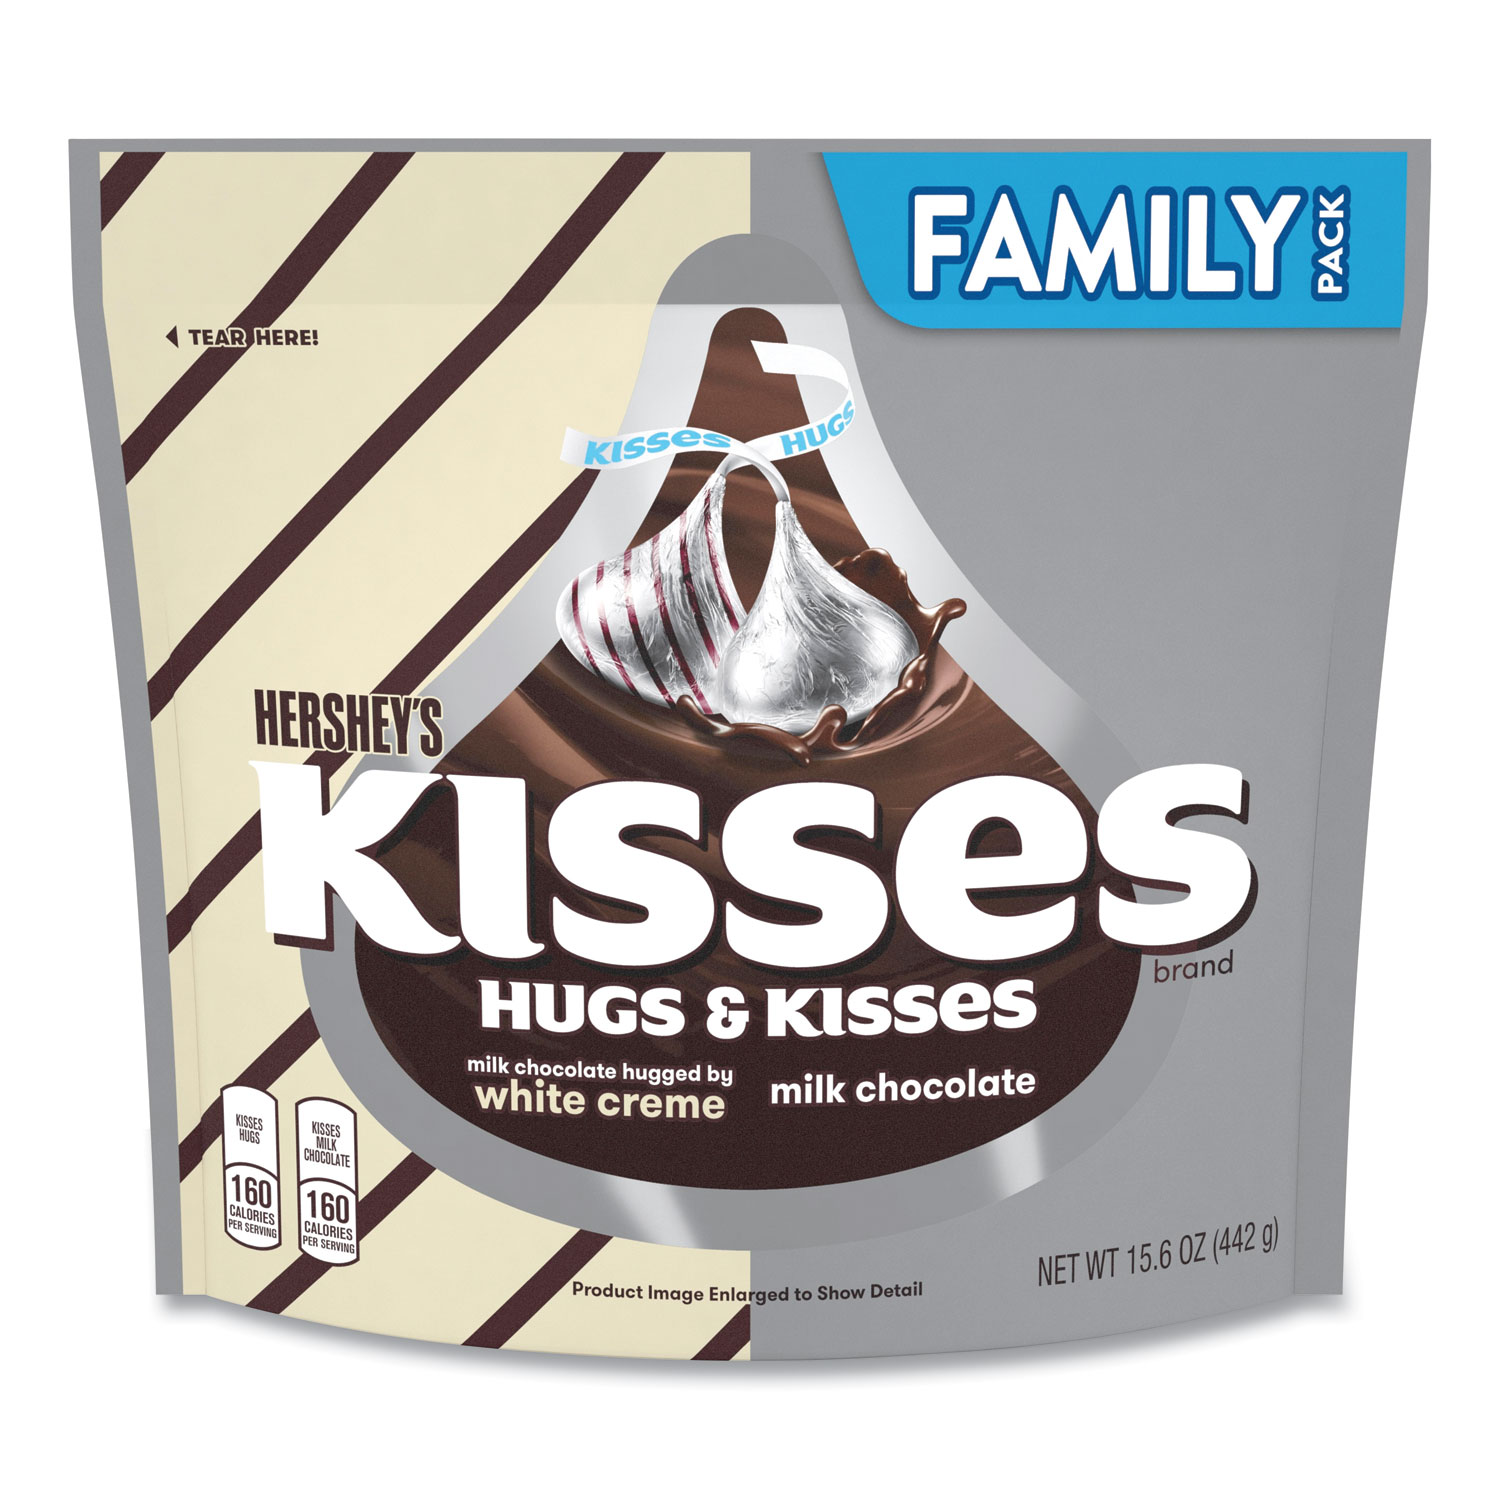  Hershey's 12922 KISSES and HUGS Family Pack Assortment, 15.6 oz Bag, 3 Bags/Pack, Free Delivery in 1-4 Business Days (GRR24600405) 